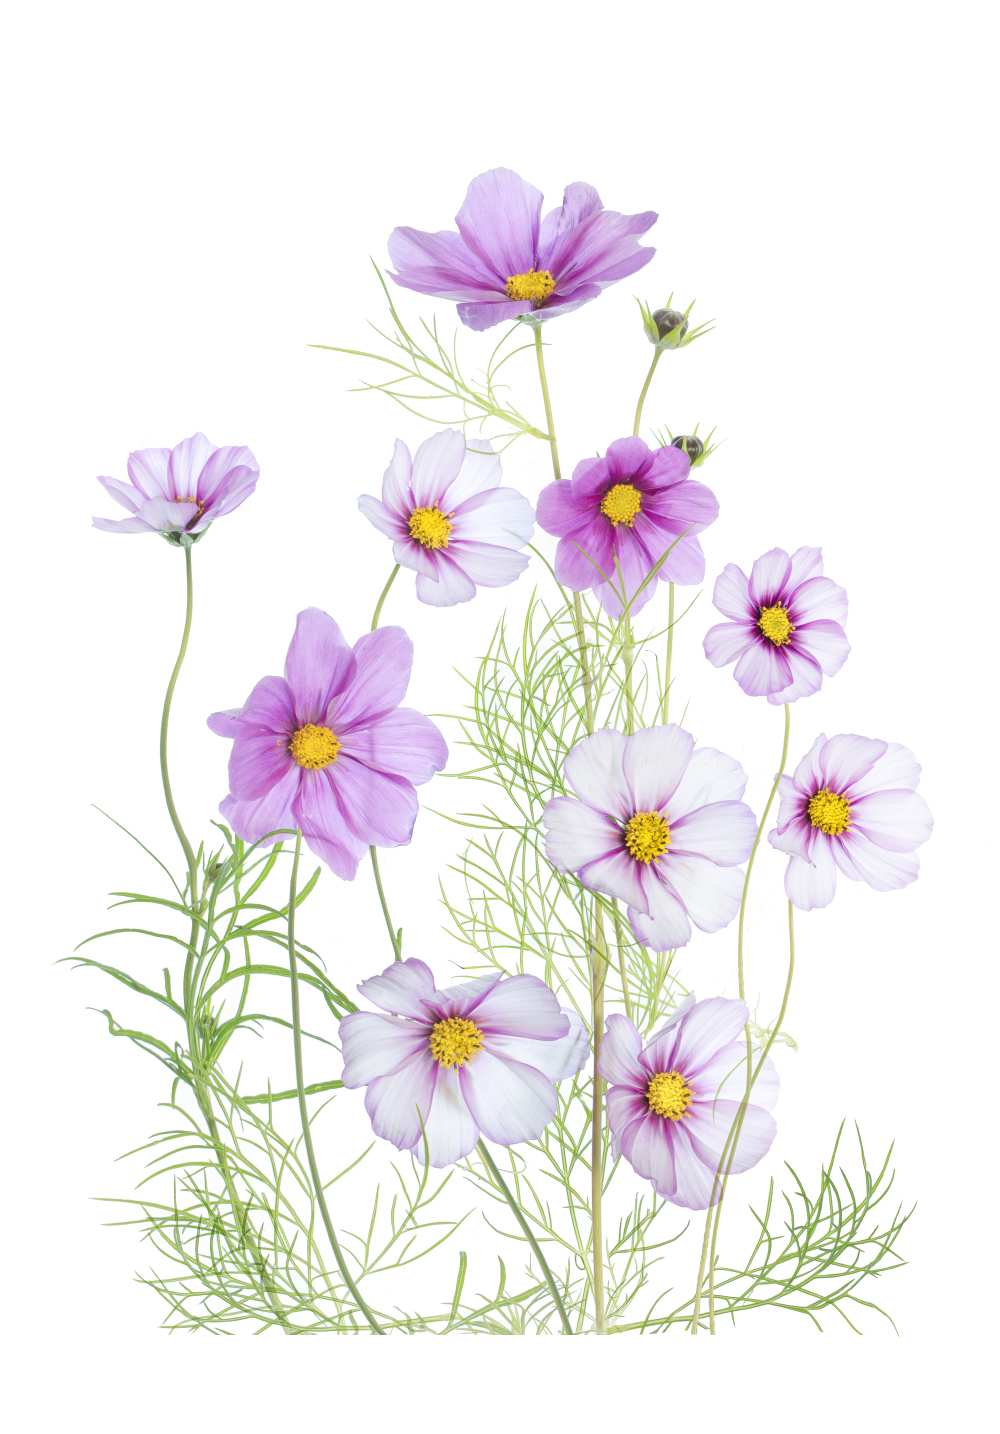 Cosmos Comfort from Mandy Disher